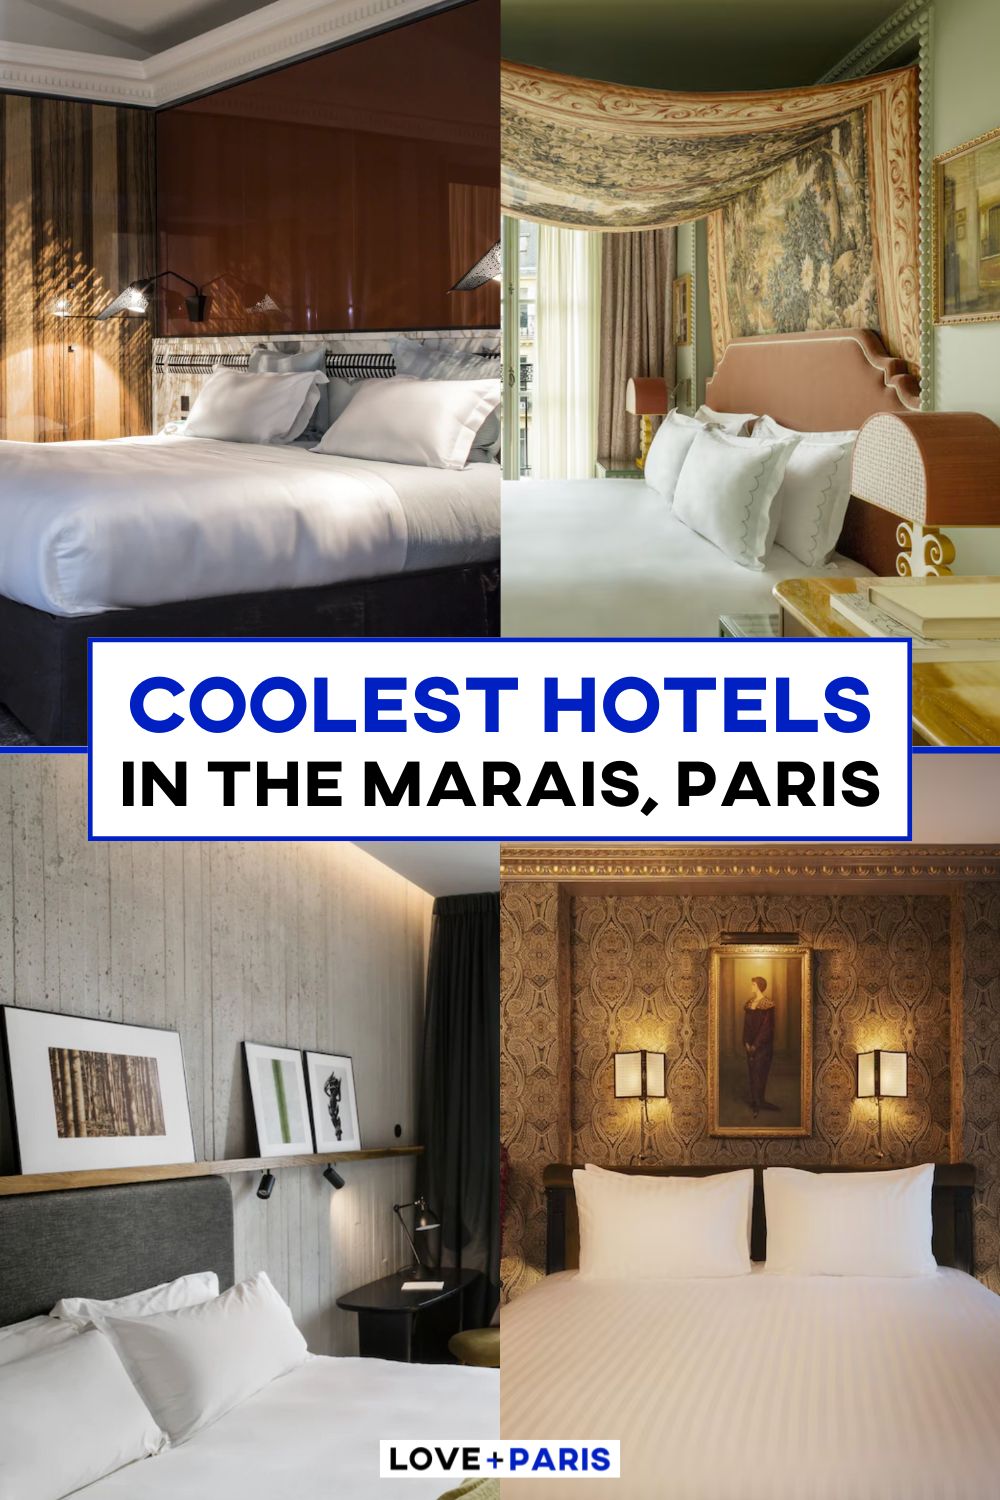 This is a Pinterest picture detailing the coolest hotels in the Marais, Paris.